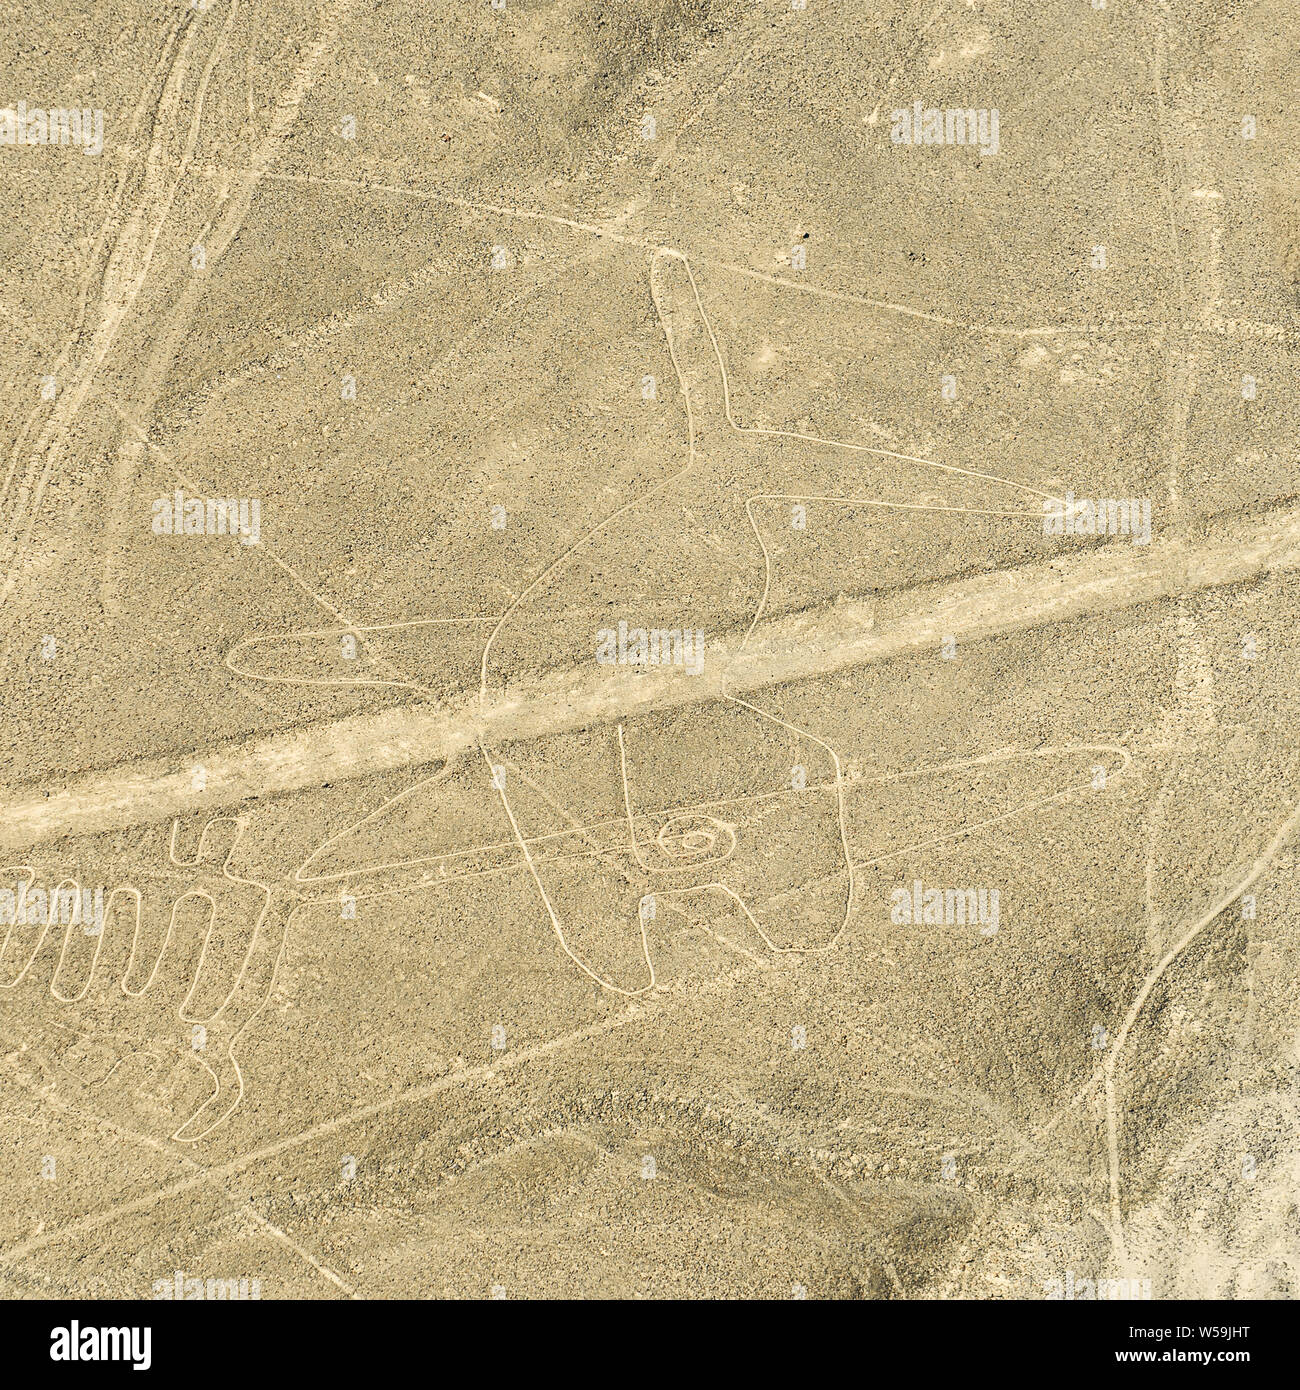 The whale geoglyph from the Nazca Lines archaeology site in the peruvian desert, Nazca, Peru. Stock Photo